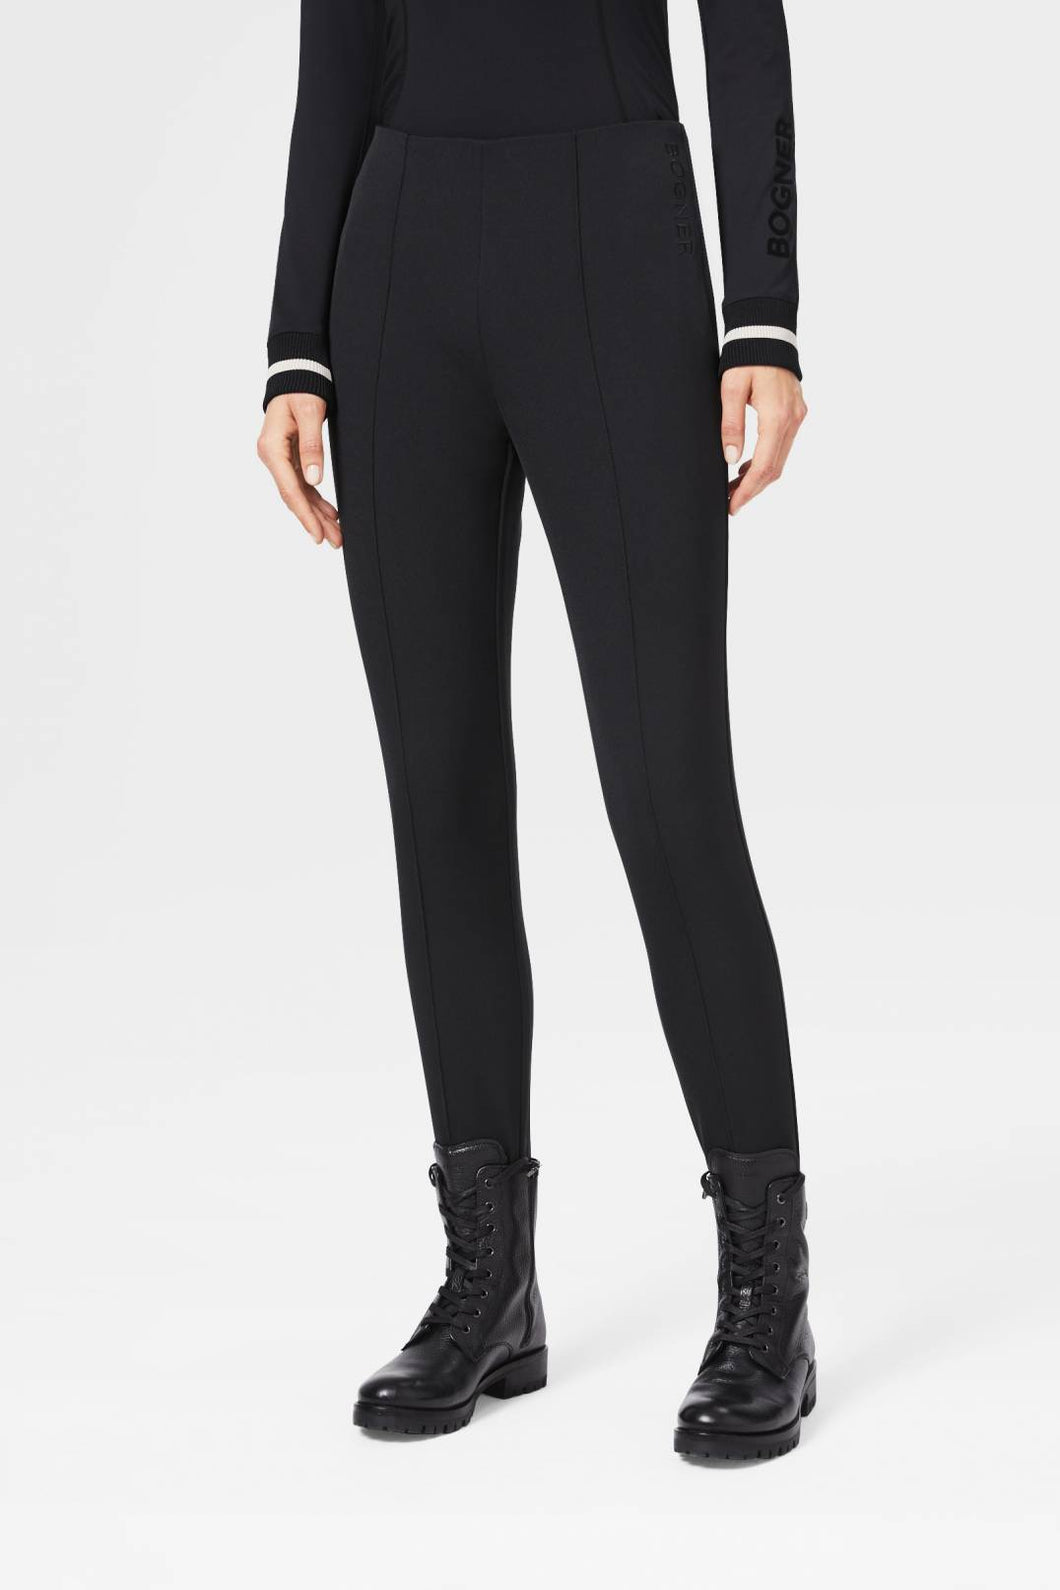 Elaine Schoeller Soft Multi-Stretch Pants - Black – THE HOLIDAY PROJECT